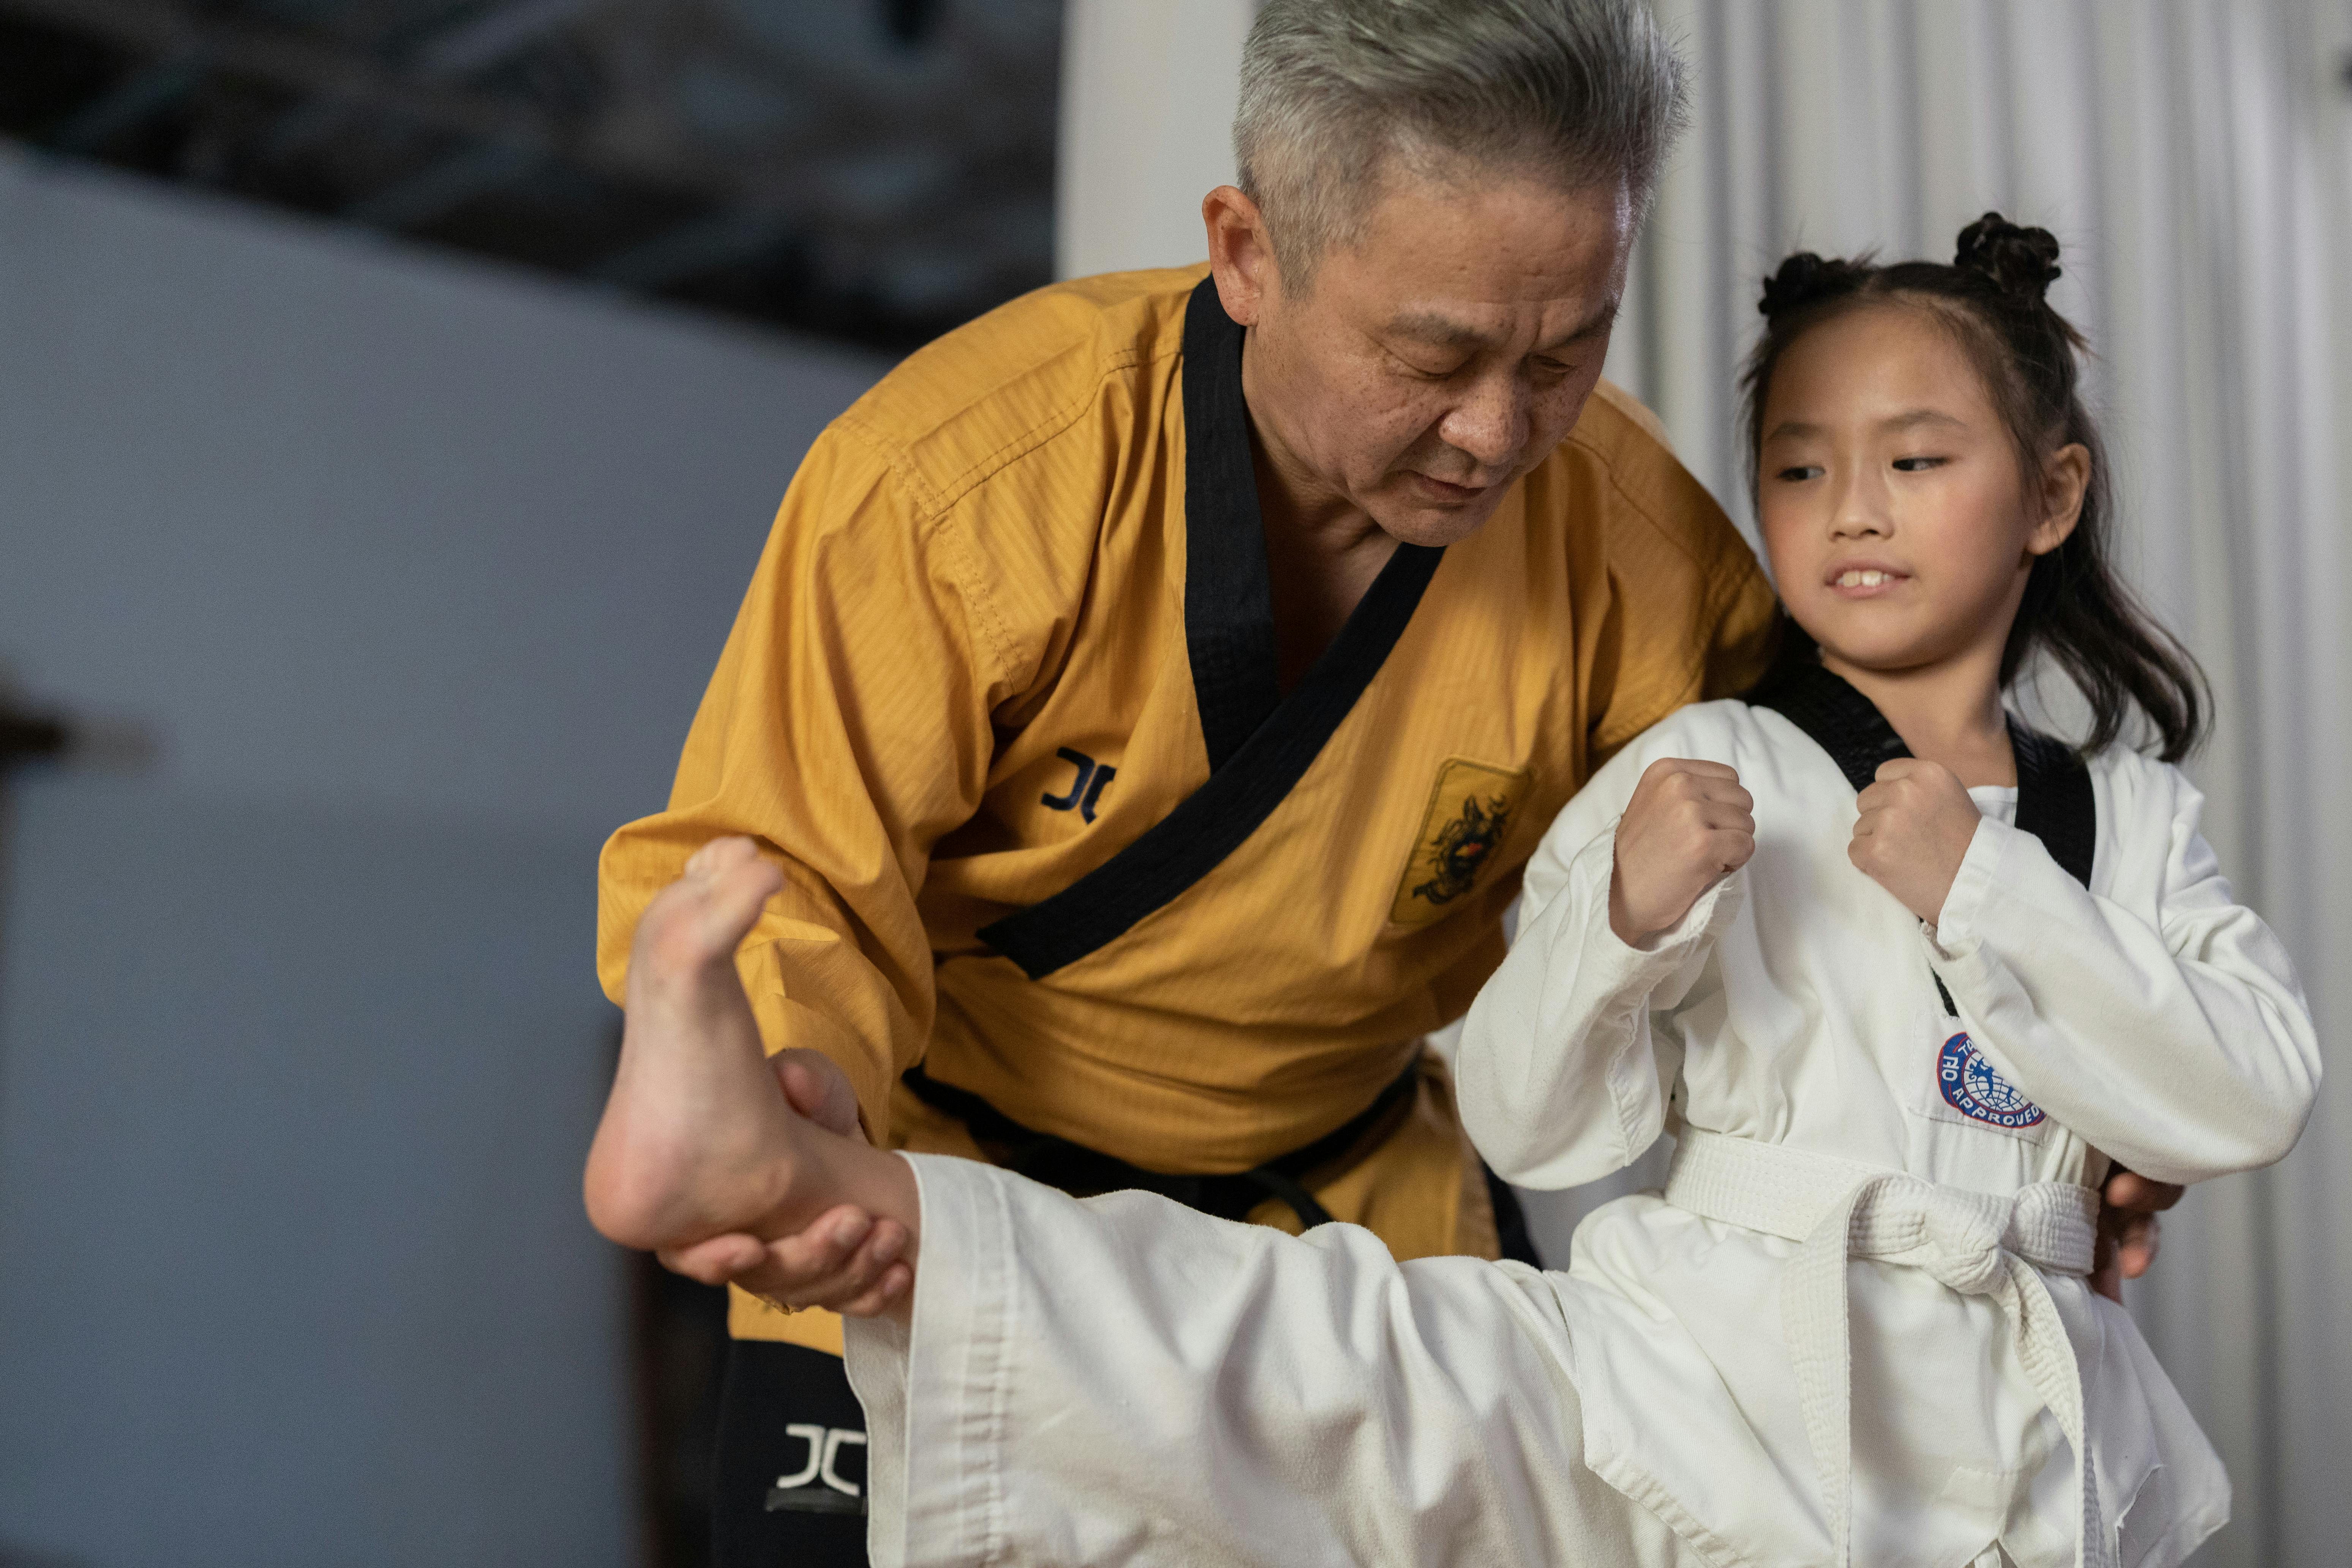 Students of karate must follow proper form as well as embody certain traits. Photo from Pexels.